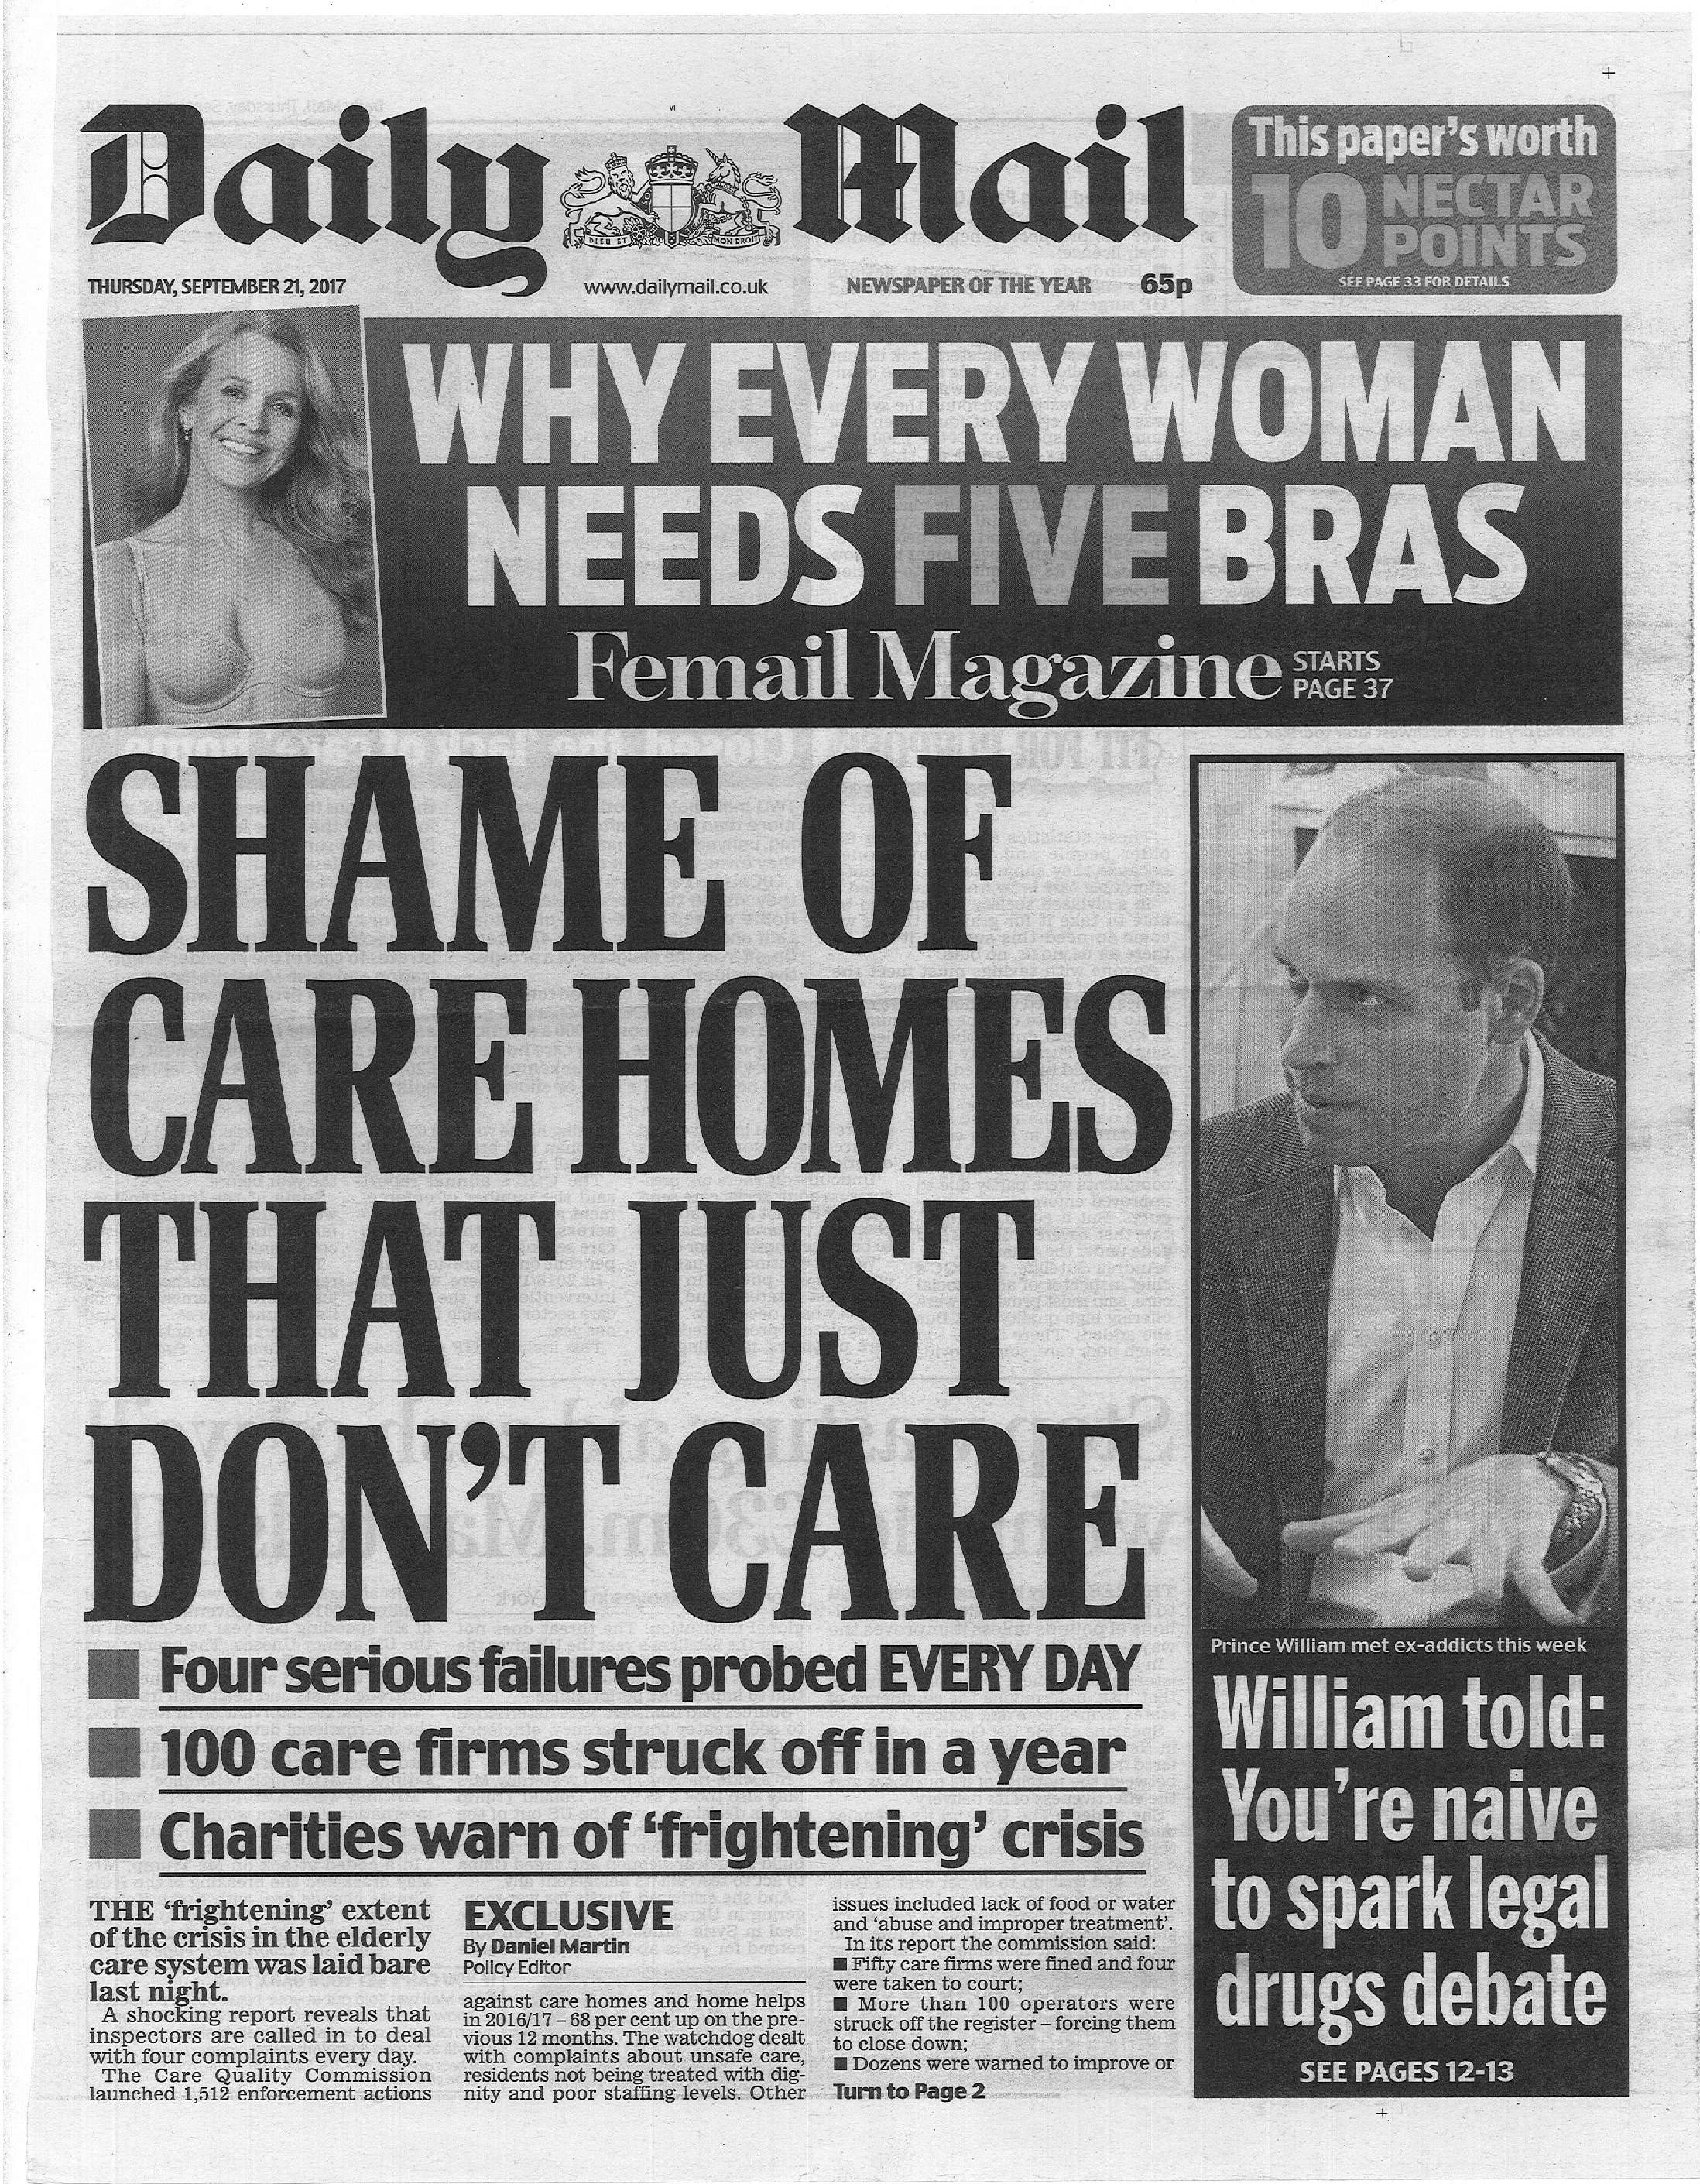 Shame of care homes that just don't care